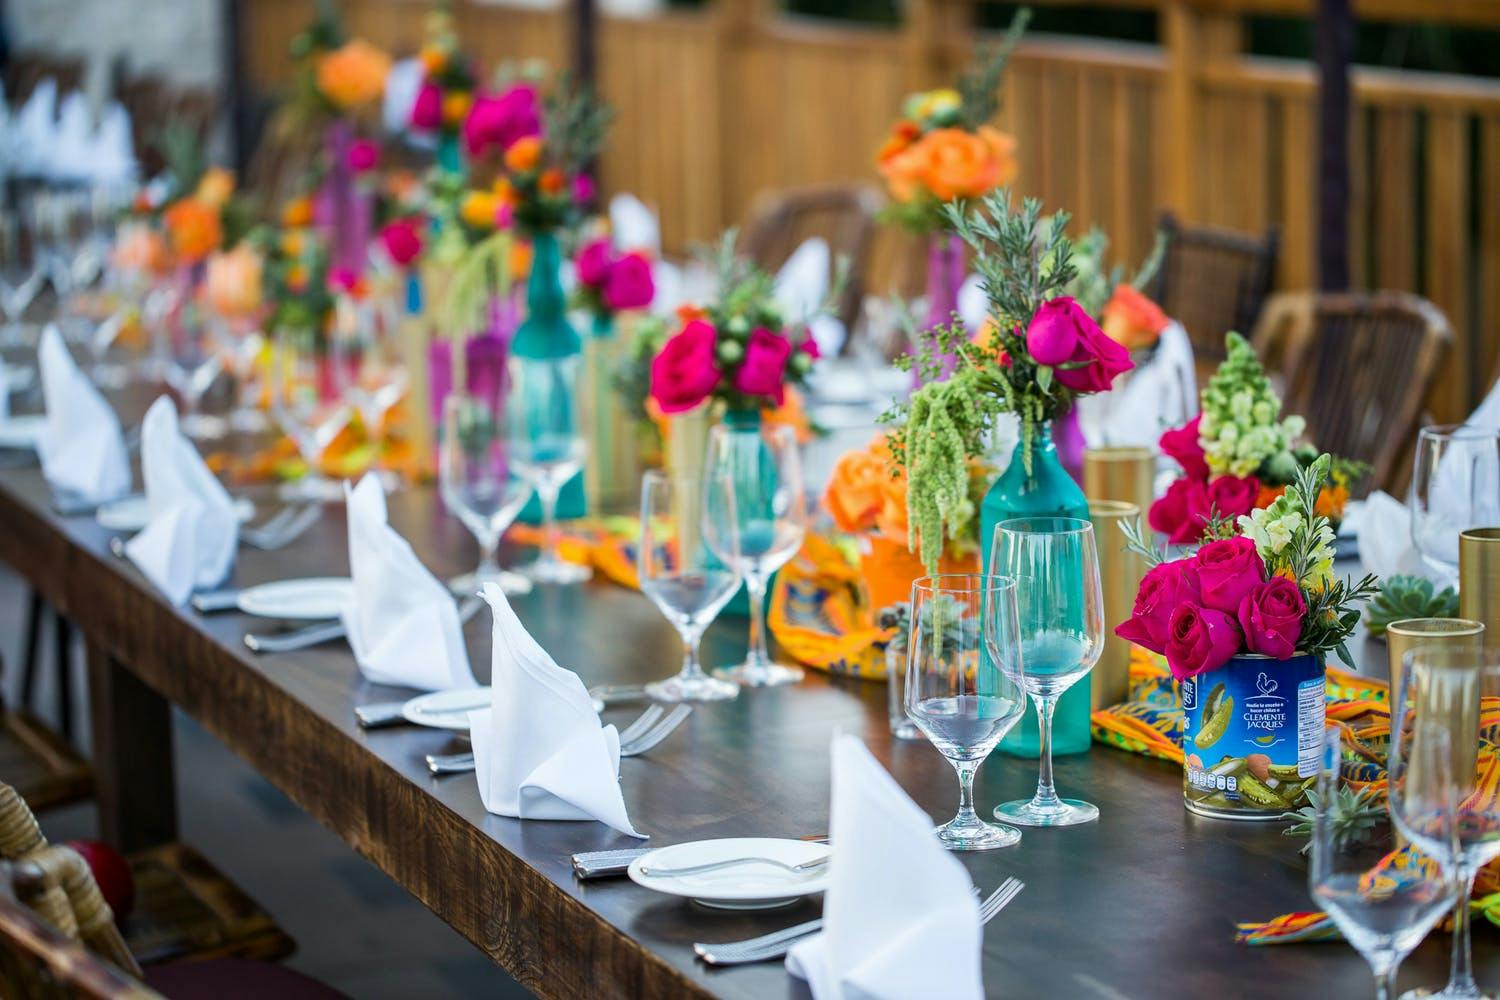 Beach Wedding Centerpiece With Colorful Glassware and Blooms | PartySlate